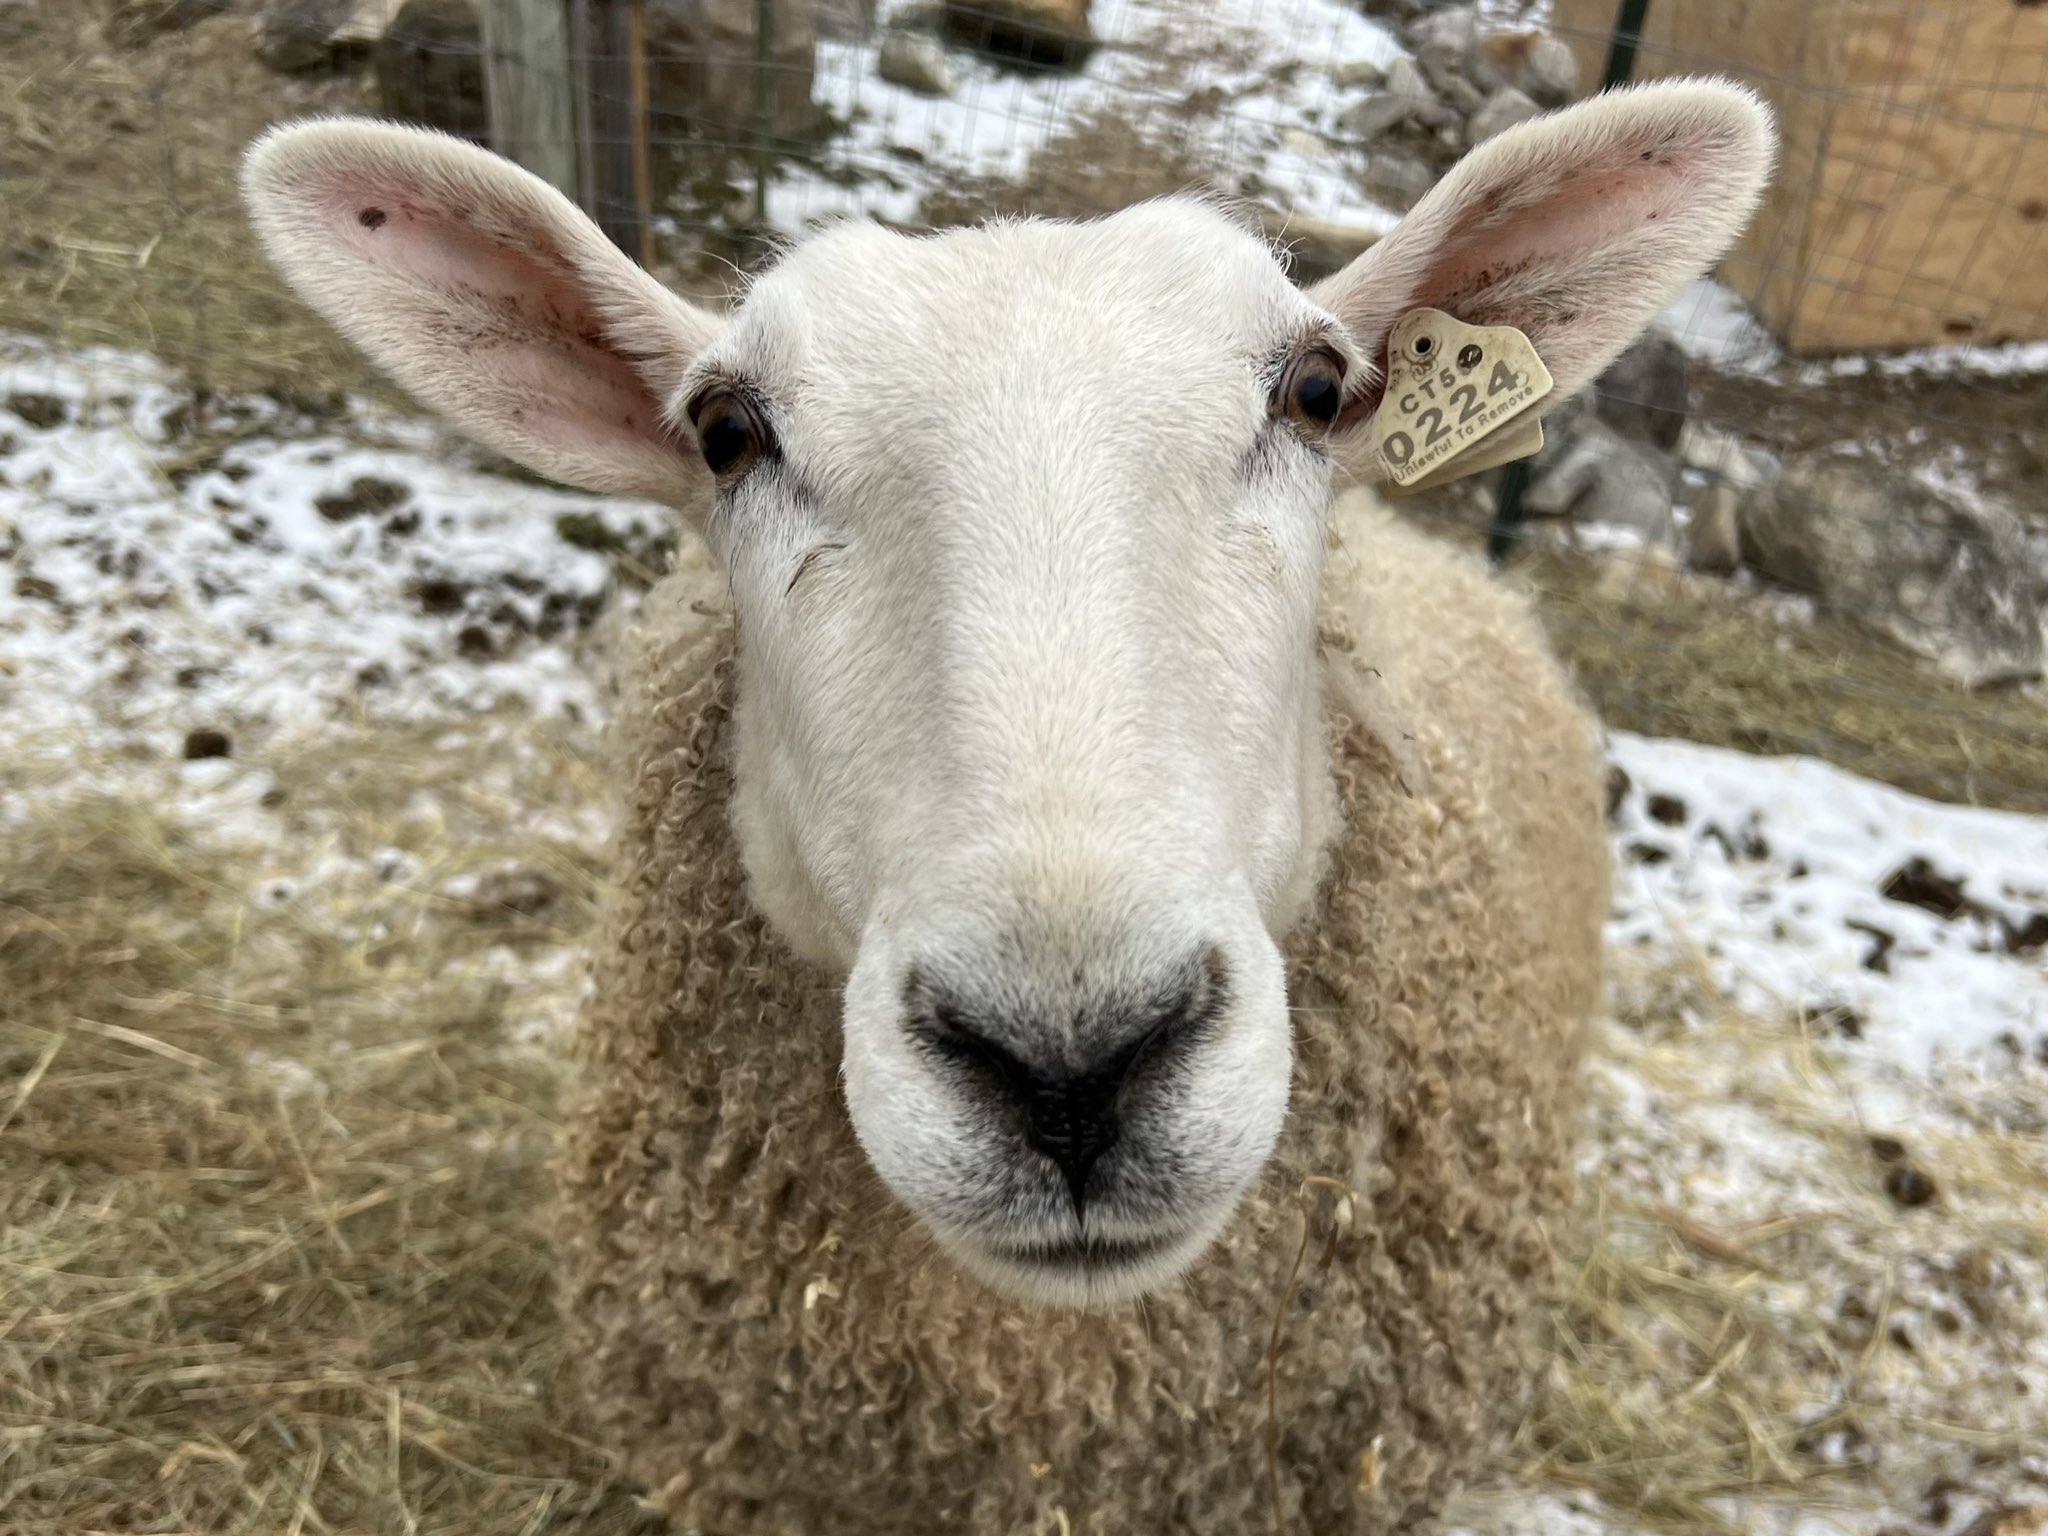 A sheep at Kinder Way Farm Sanctuary at Middlebury, Vermont.